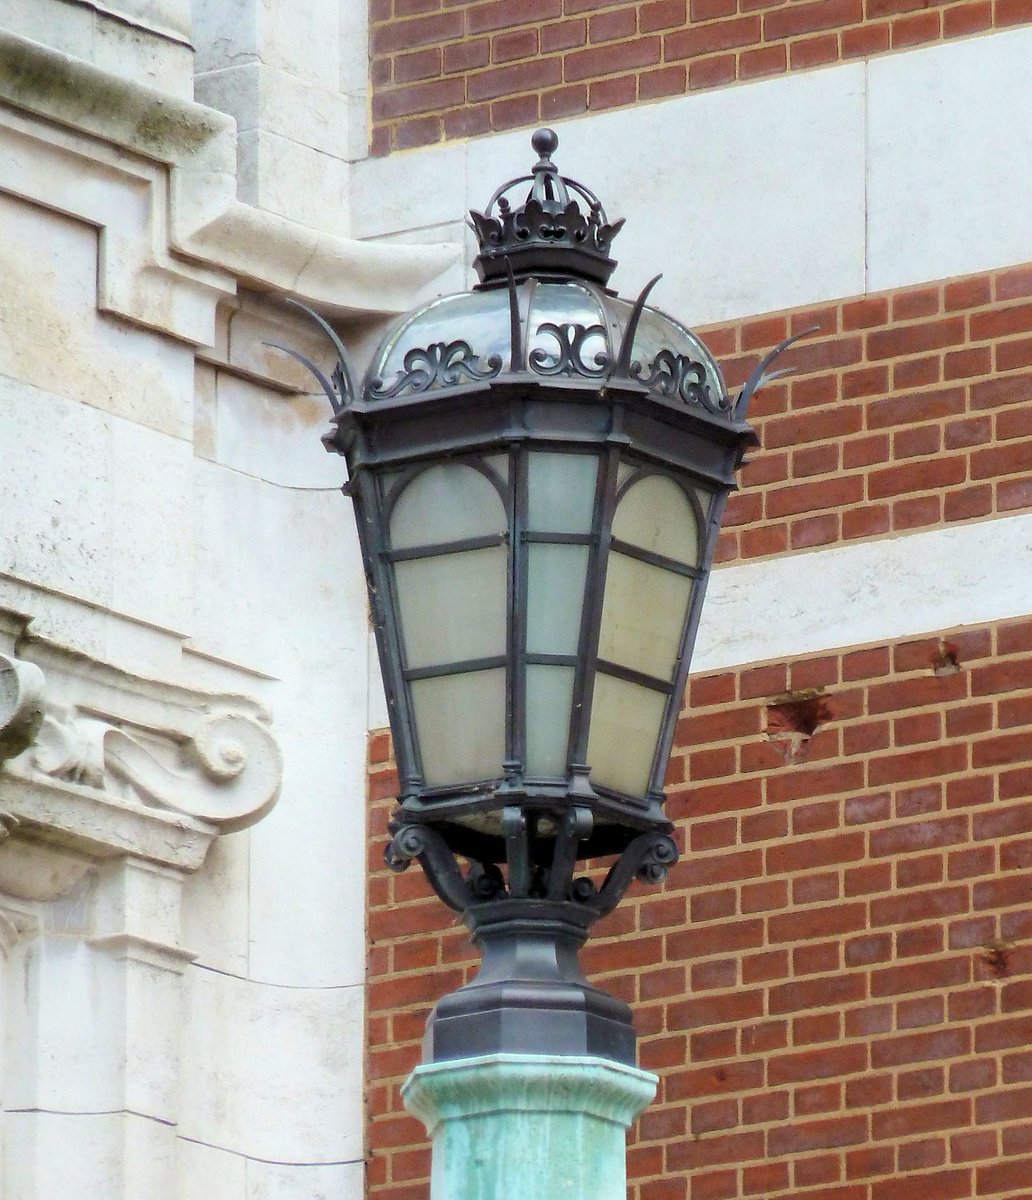 Gaslight of the Day, No.32 [Victoria and Albert Museum]